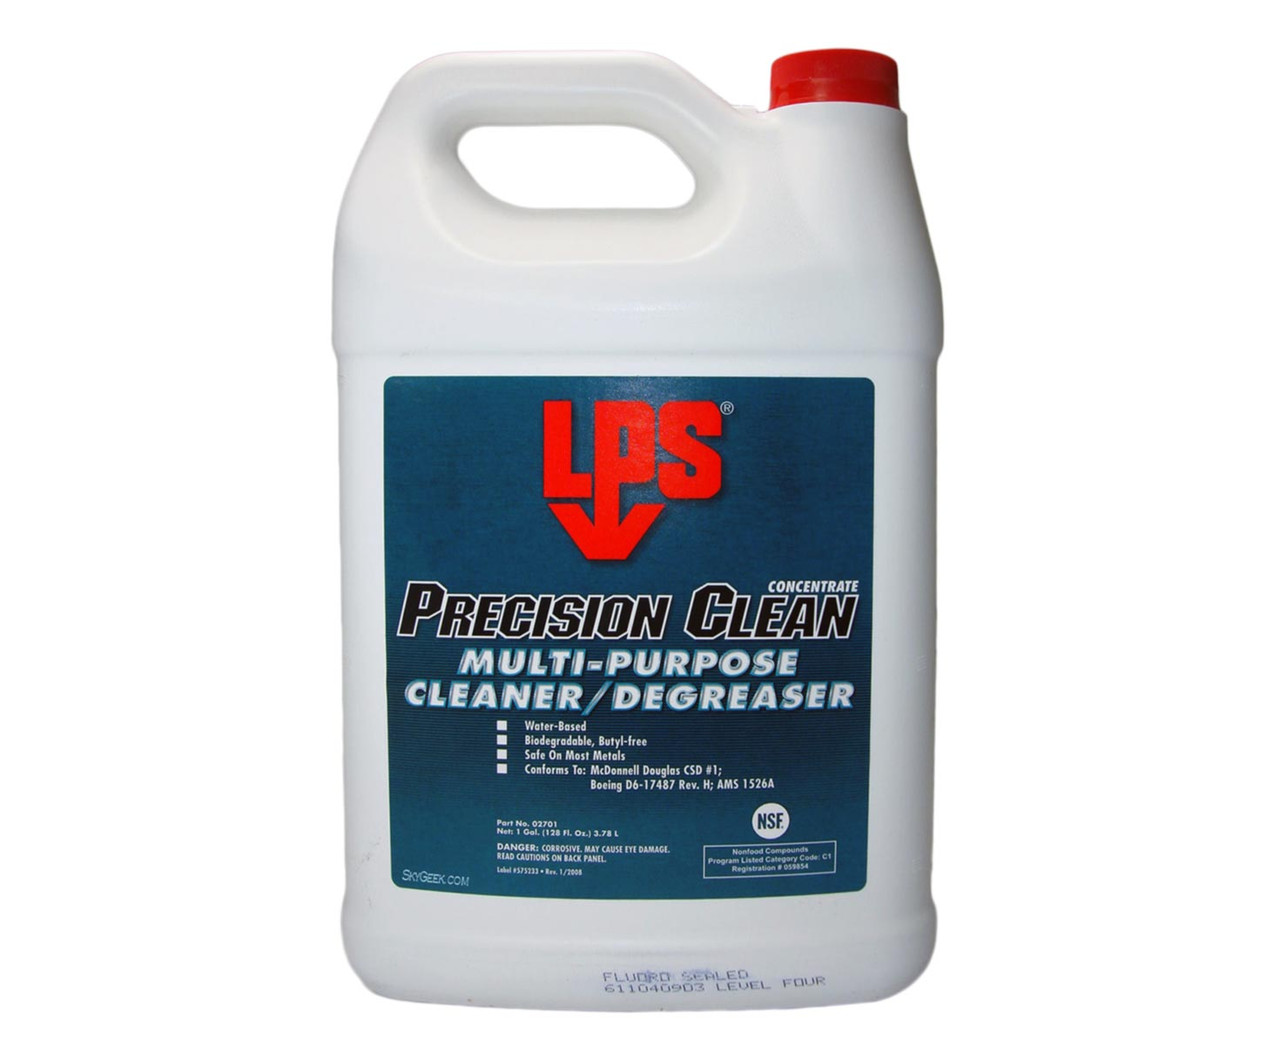 Erasure Lappe Rund ned LPS 02701 Precision Clean Green Concentrate Multi-Purpose Cleaner Degreaser  - Gallon Plastic Jug at SkyGeek.com